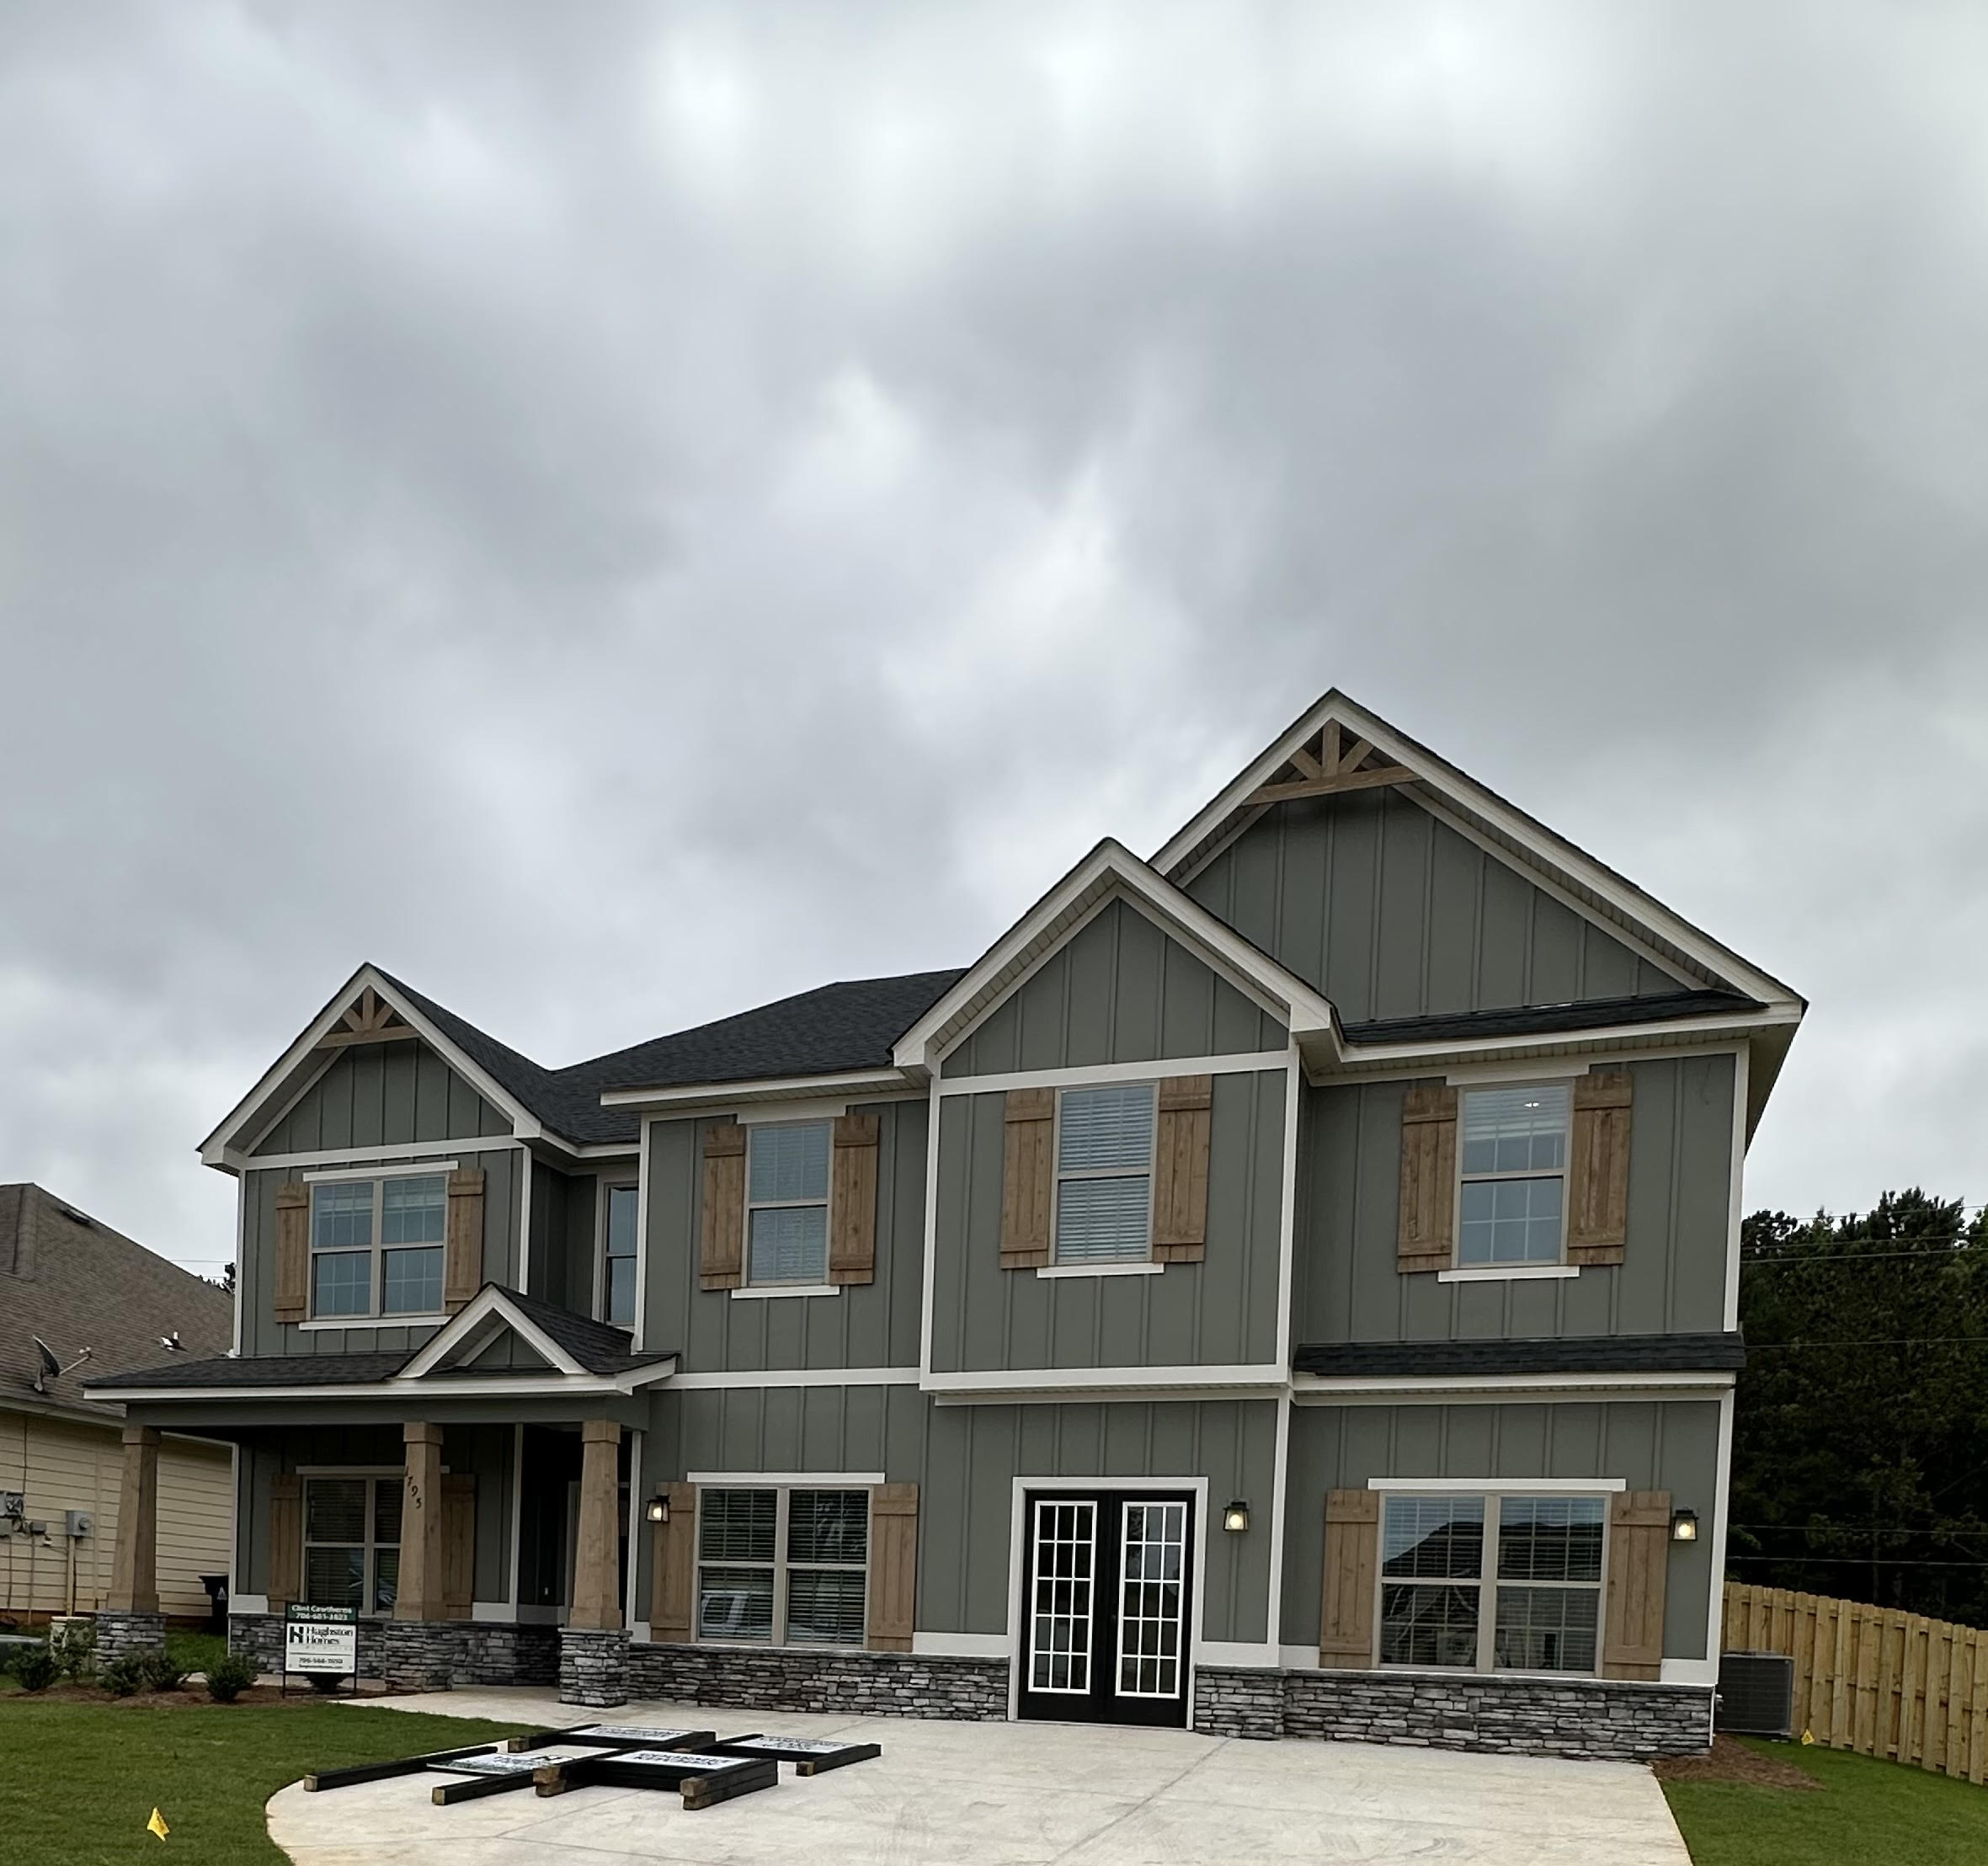 The Haven at Plainsman Lake Homes for Sale in Auburn AL